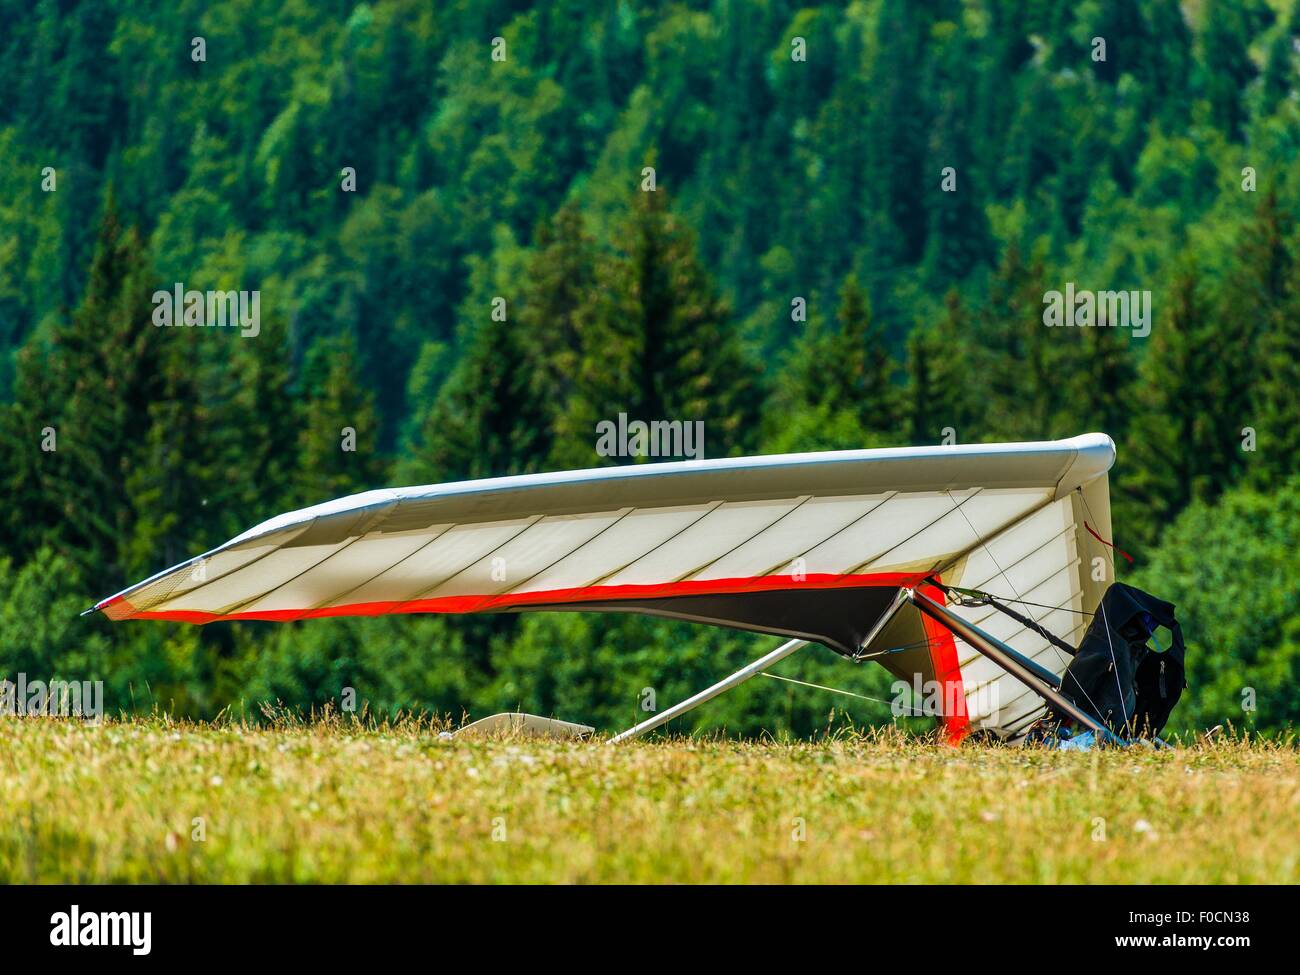 Hang Gliding Air Sport. Non-Motorized Foot-Launch Aircraft. Hang Glider on a Meadow Stock Photo